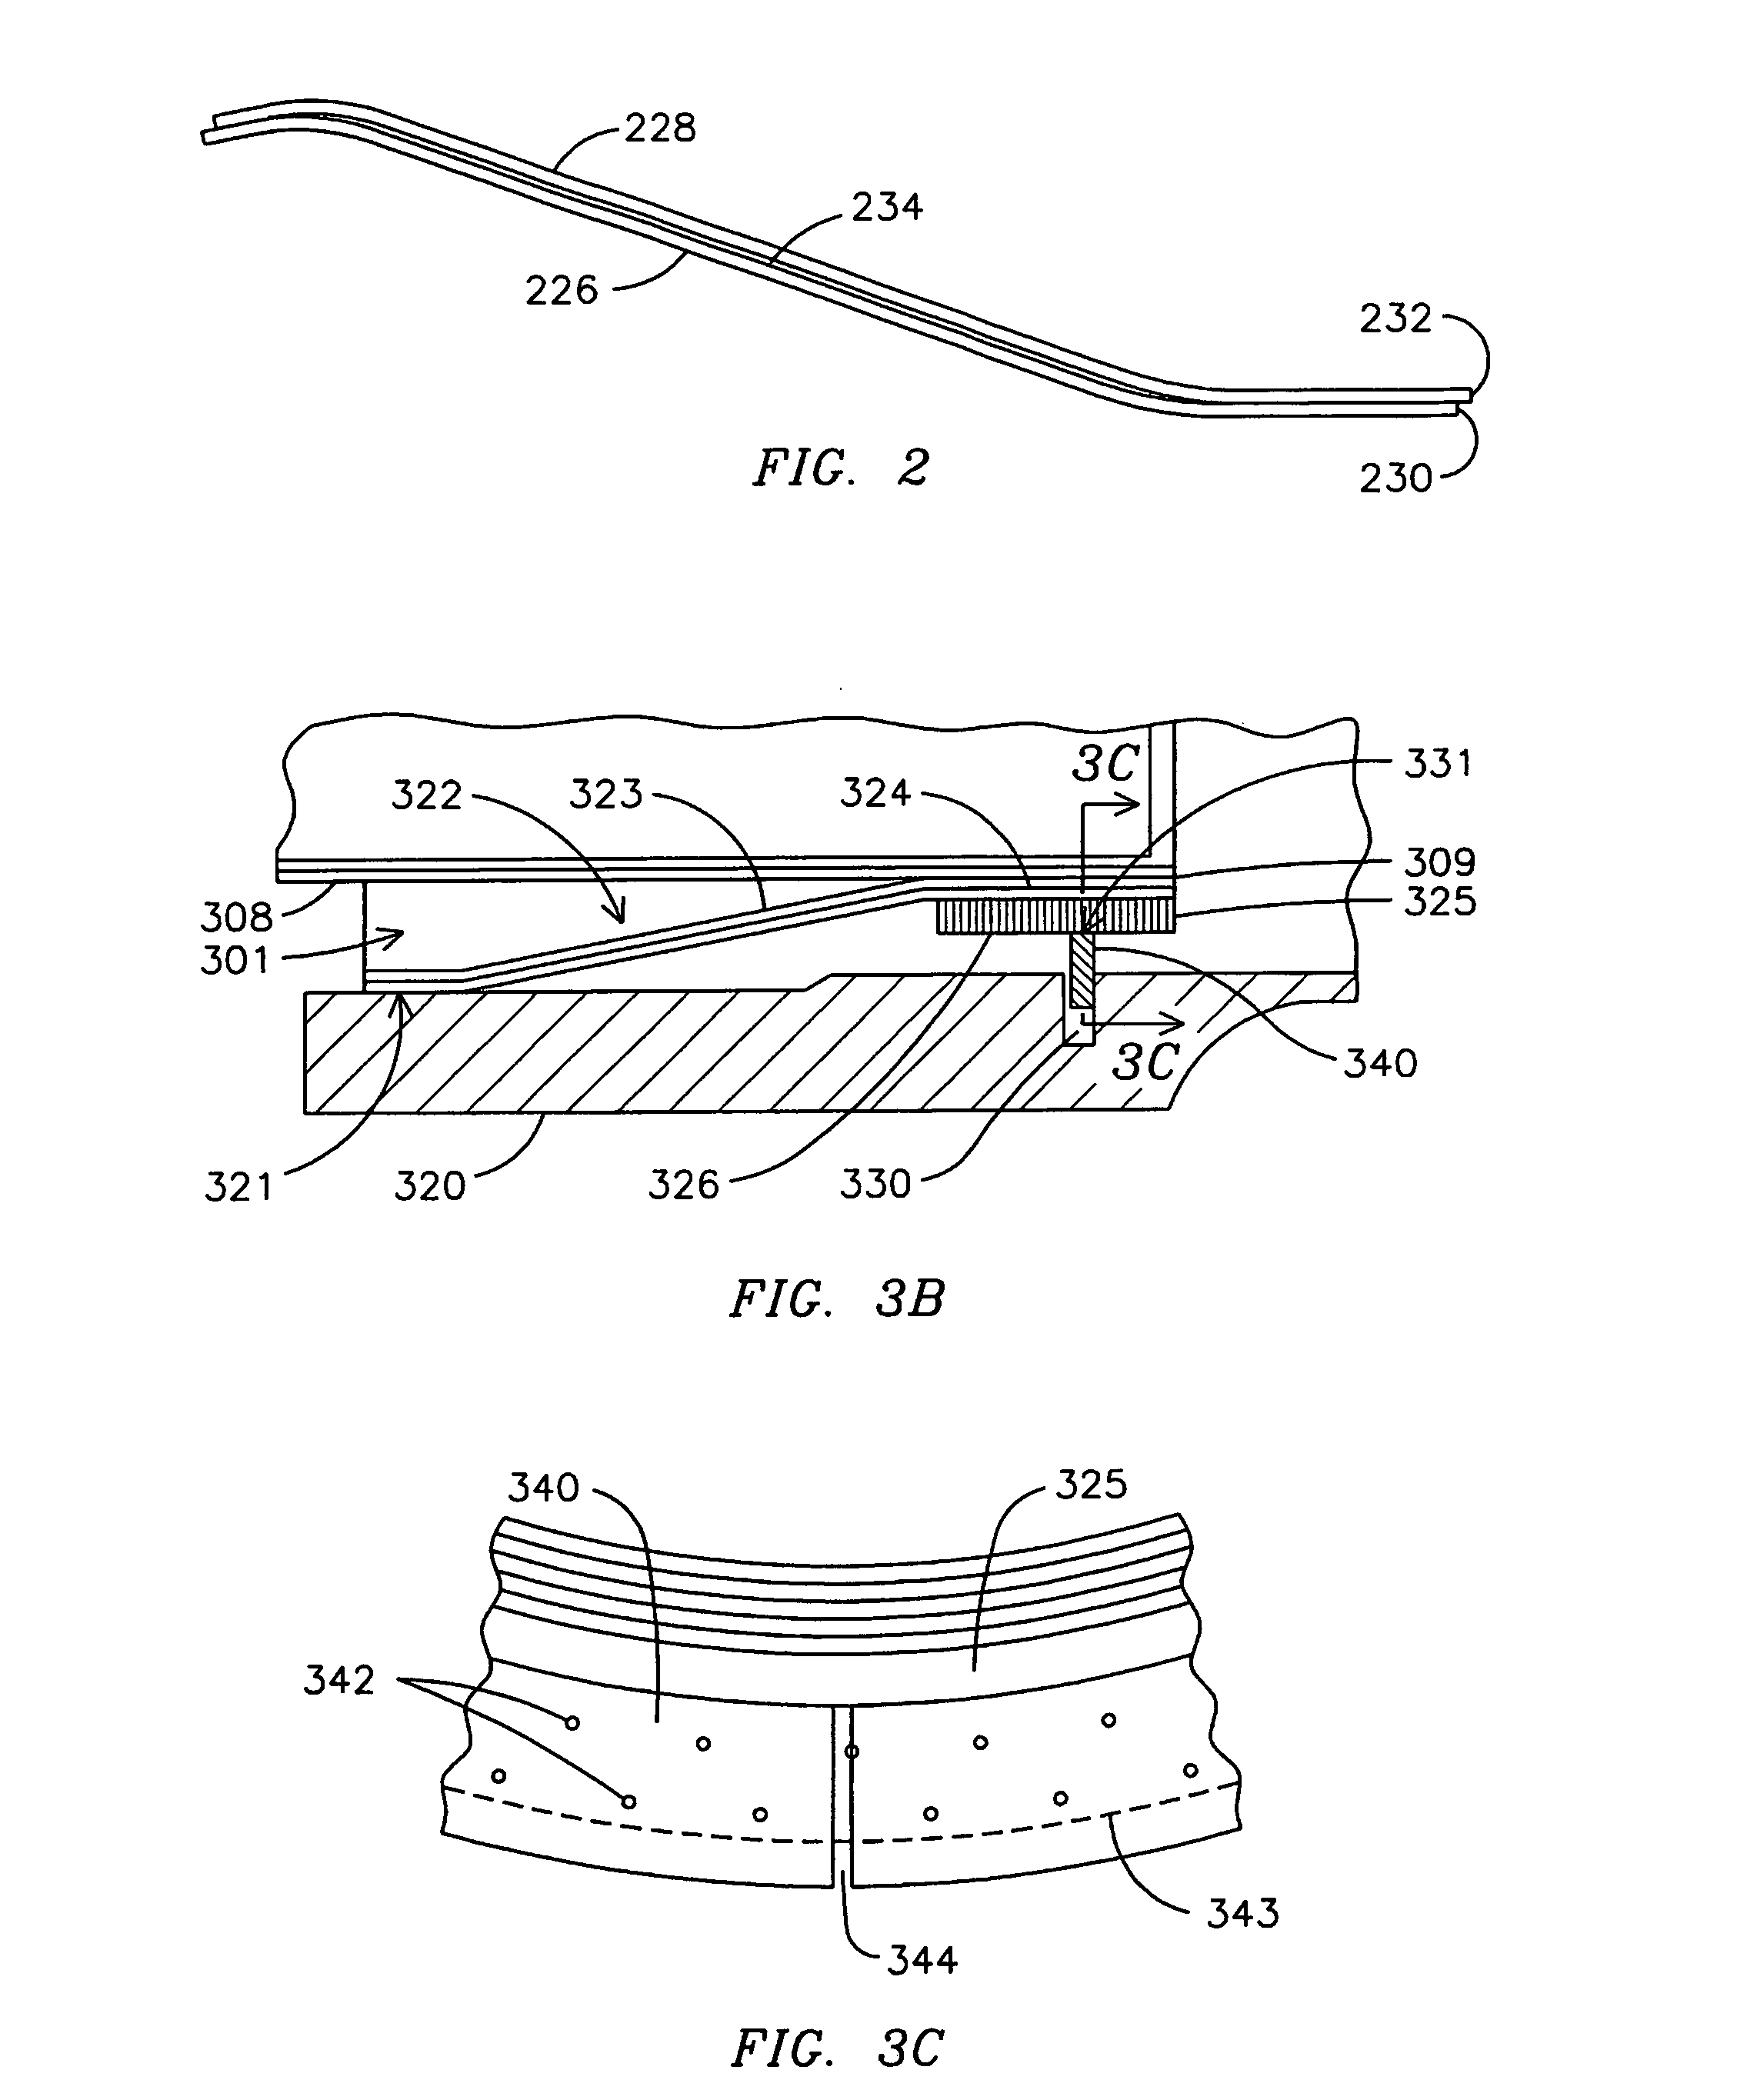 Low leakage spring clip/ring combinations for gas turbine engine